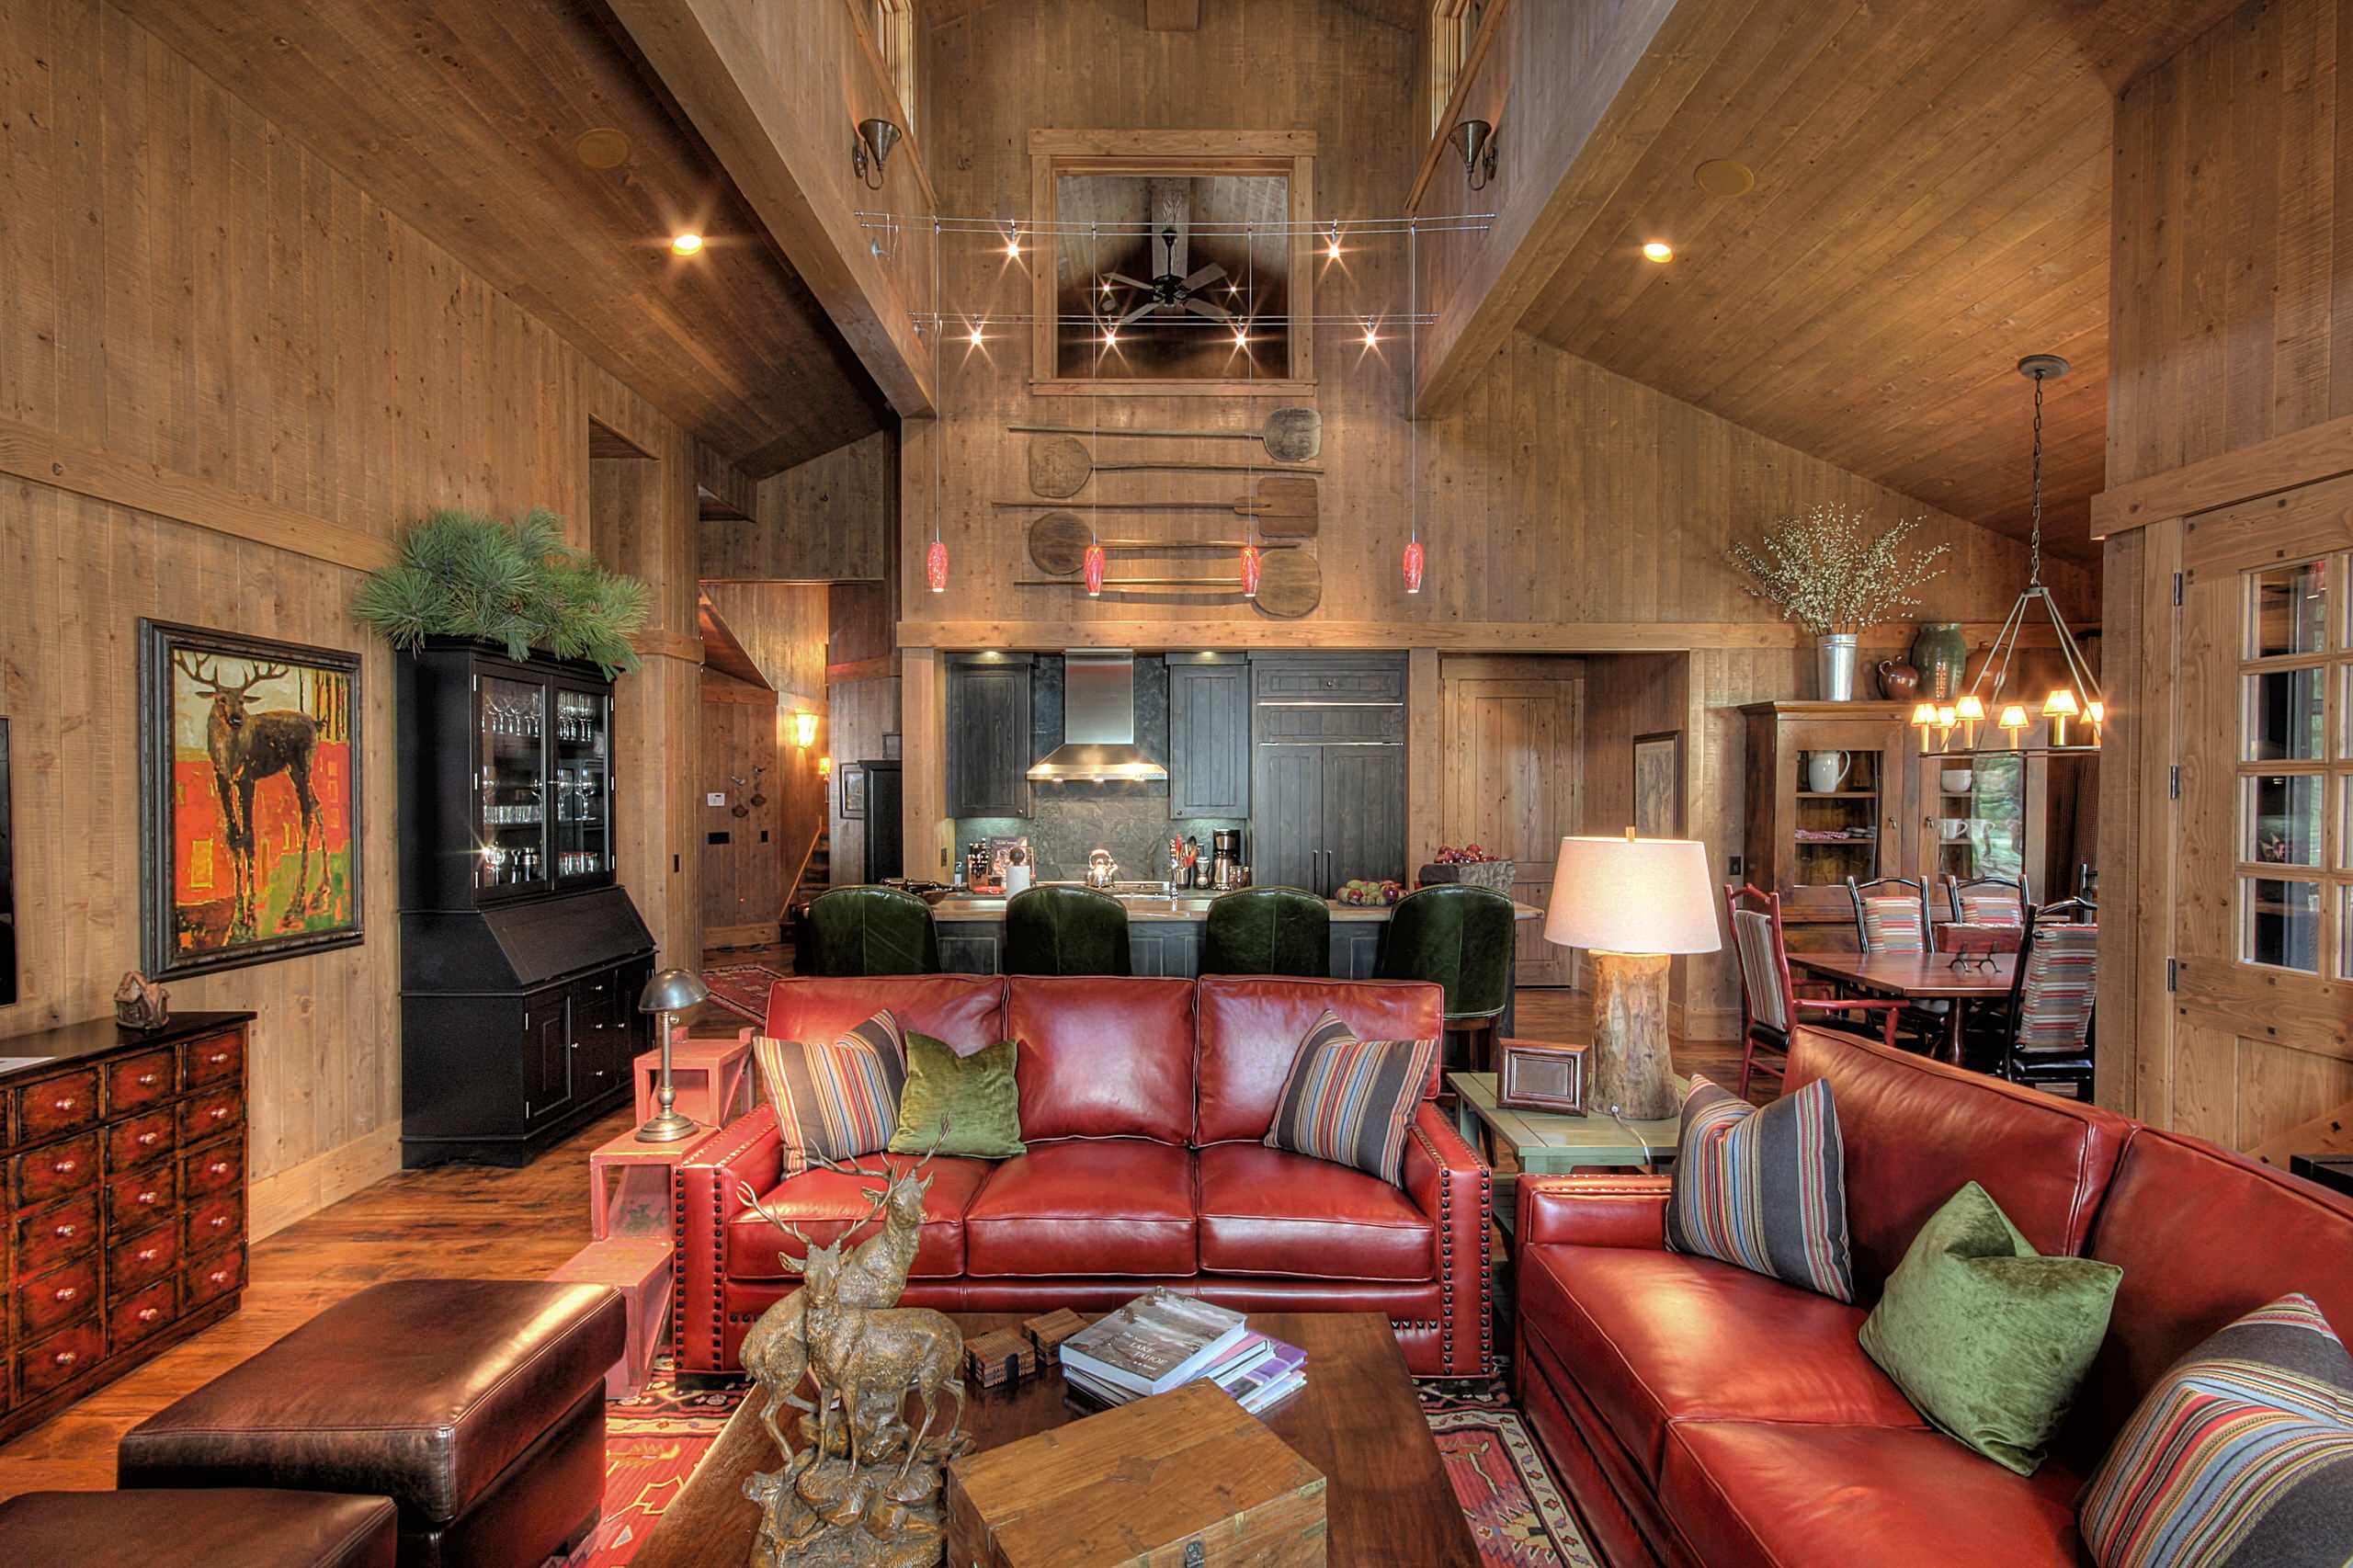 Red Leather Couch - Photos & Ideas | Houzz